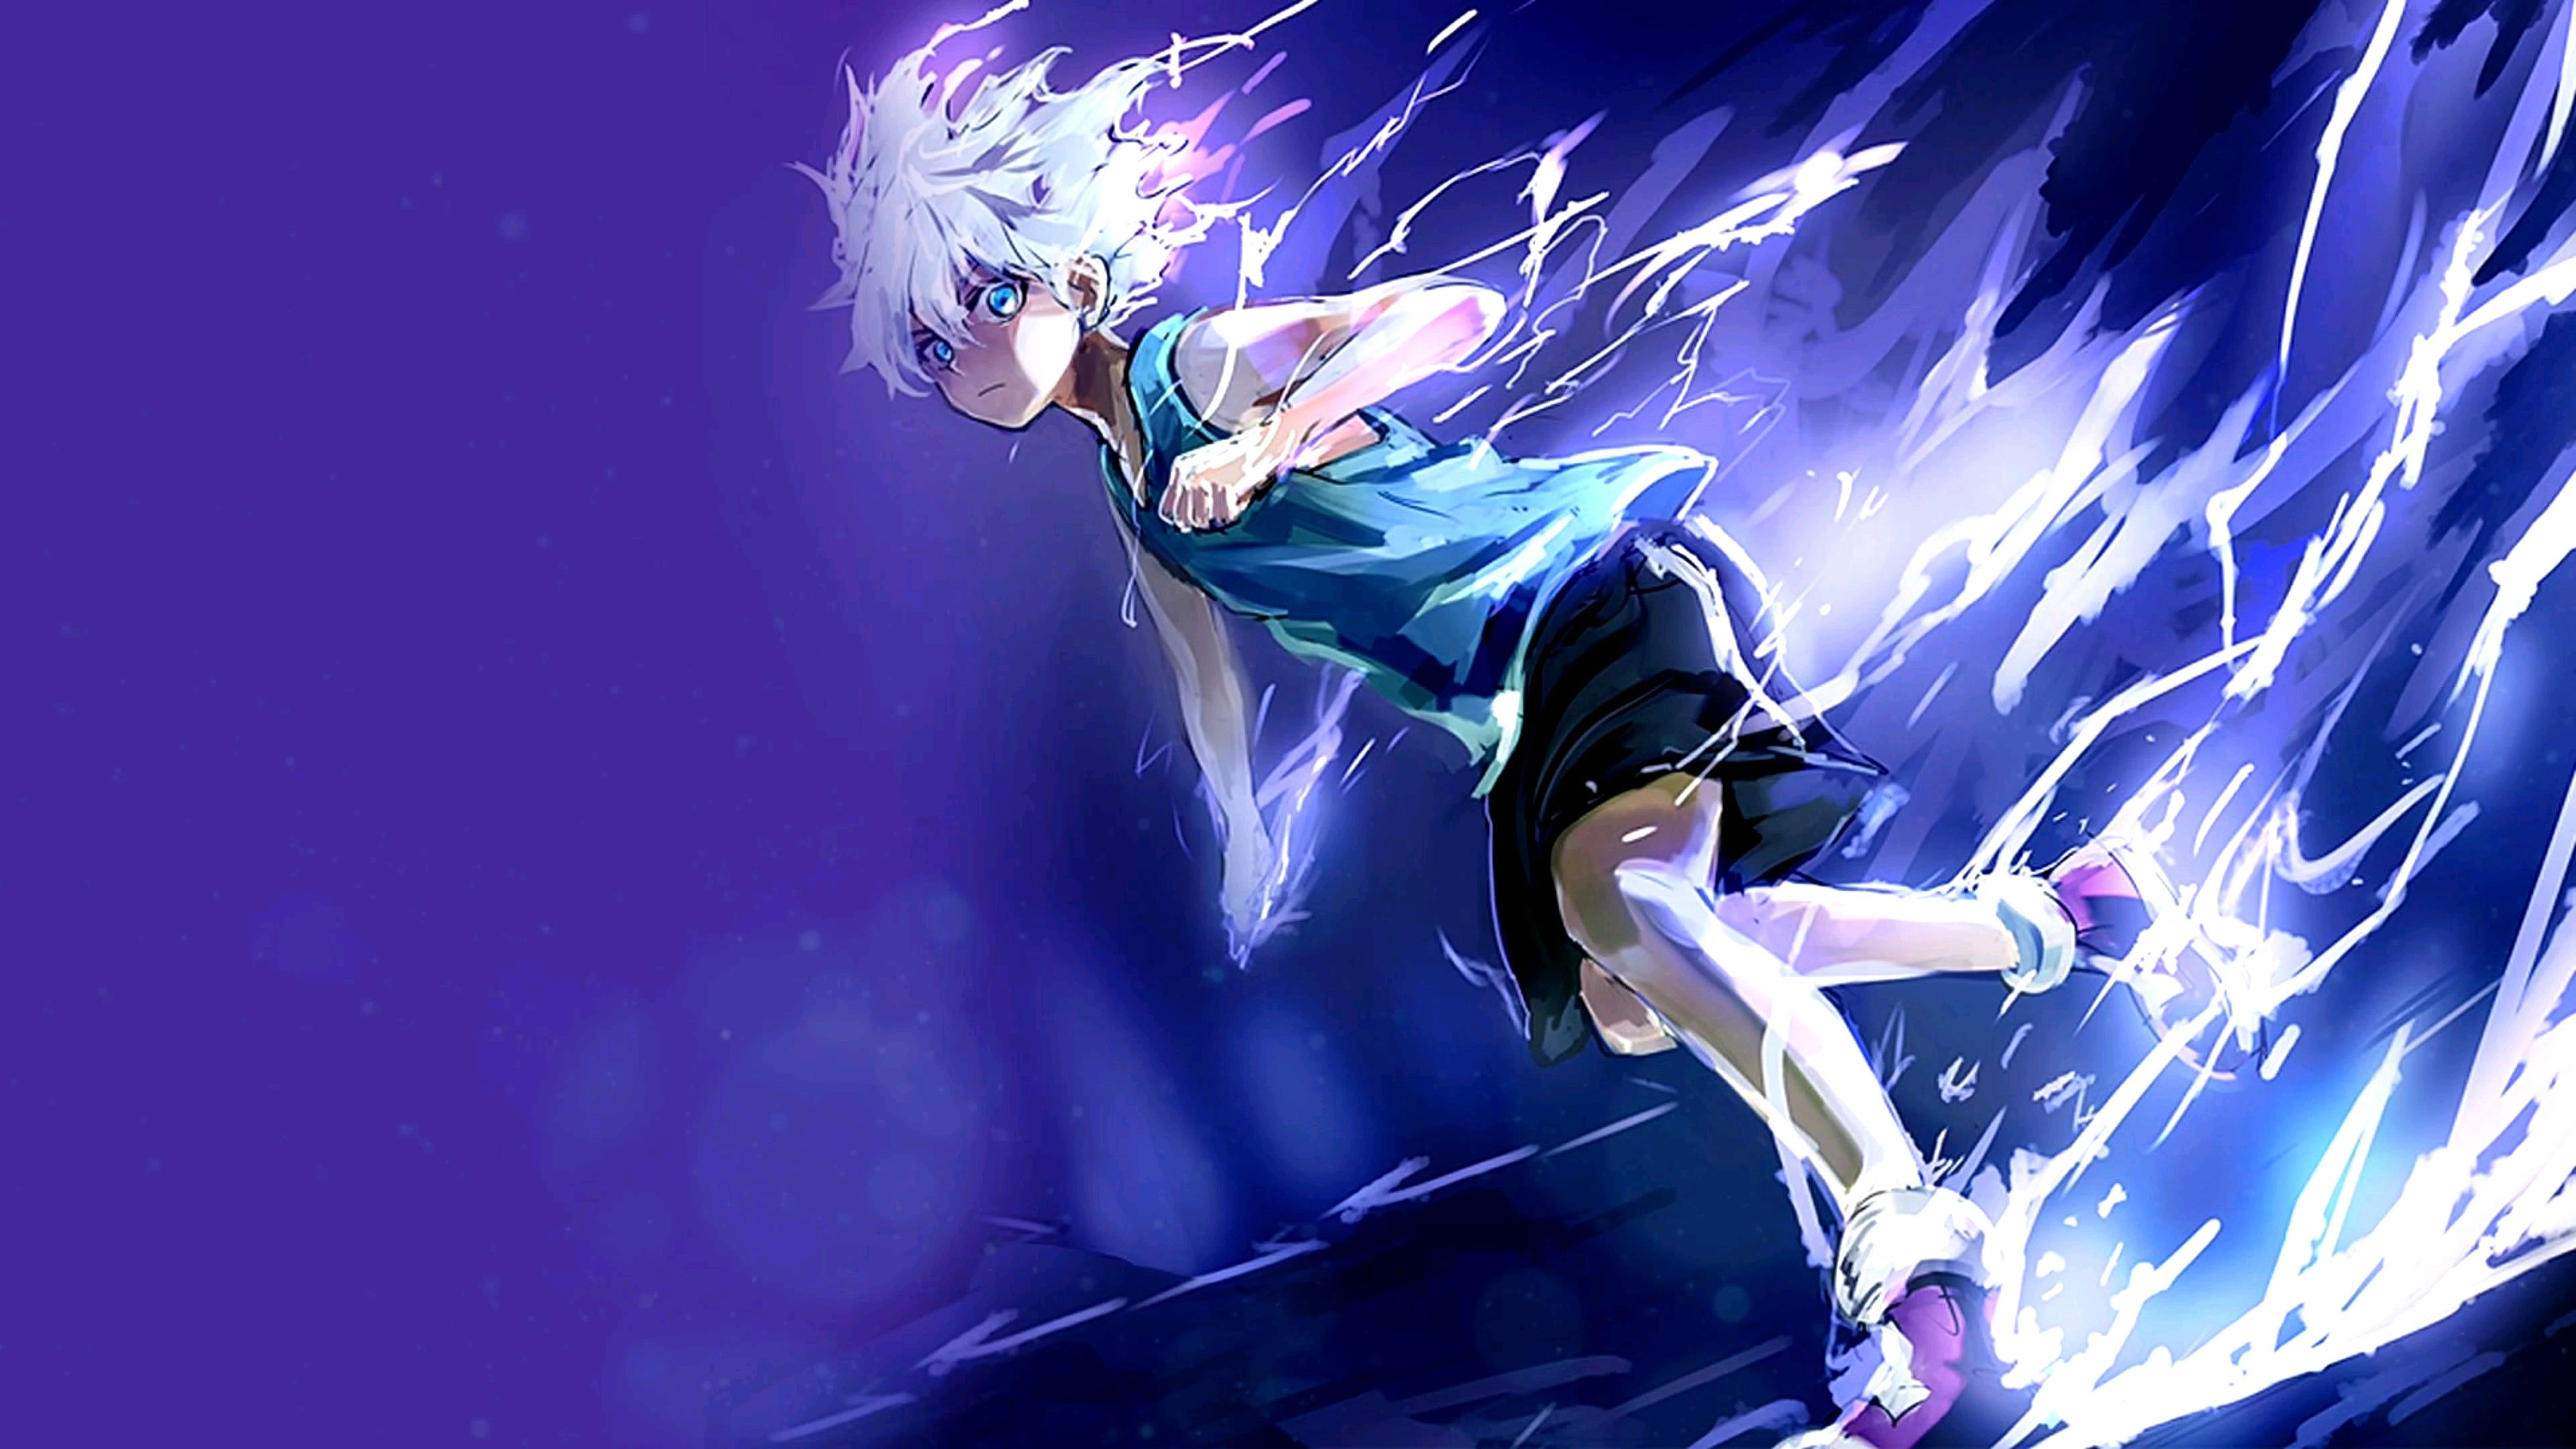 Gon and Killua Wallpapers (37+ images inside)